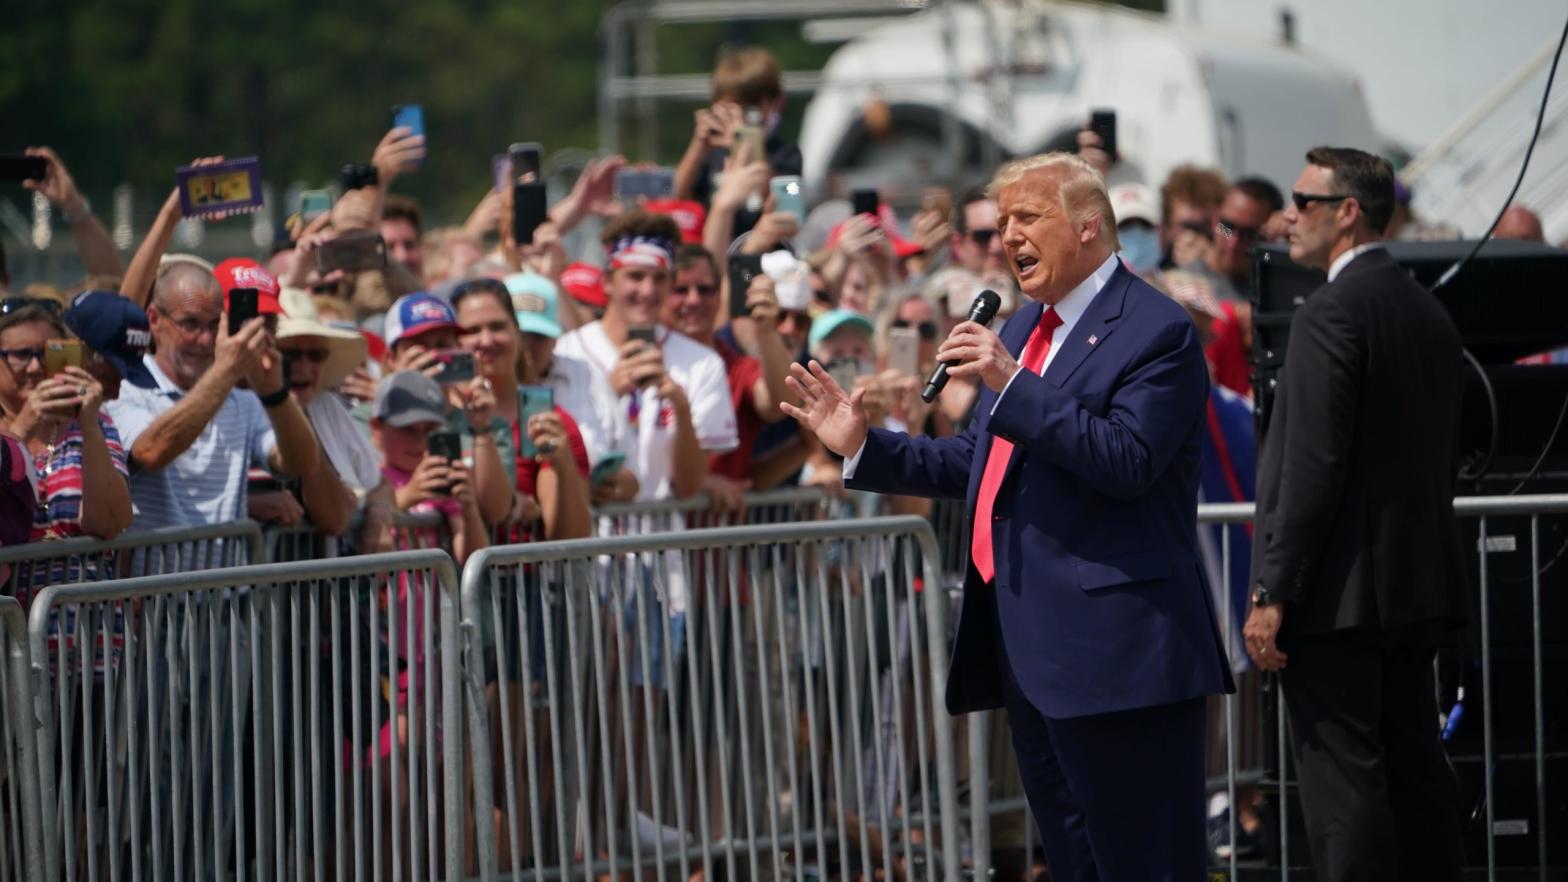 President Donald Trump, a threat to the safety and security of the U.S., addresses a crowd of supporters in North Carolina on September 2, 2020. (Photo: Mandel Ngan, Getty Images)